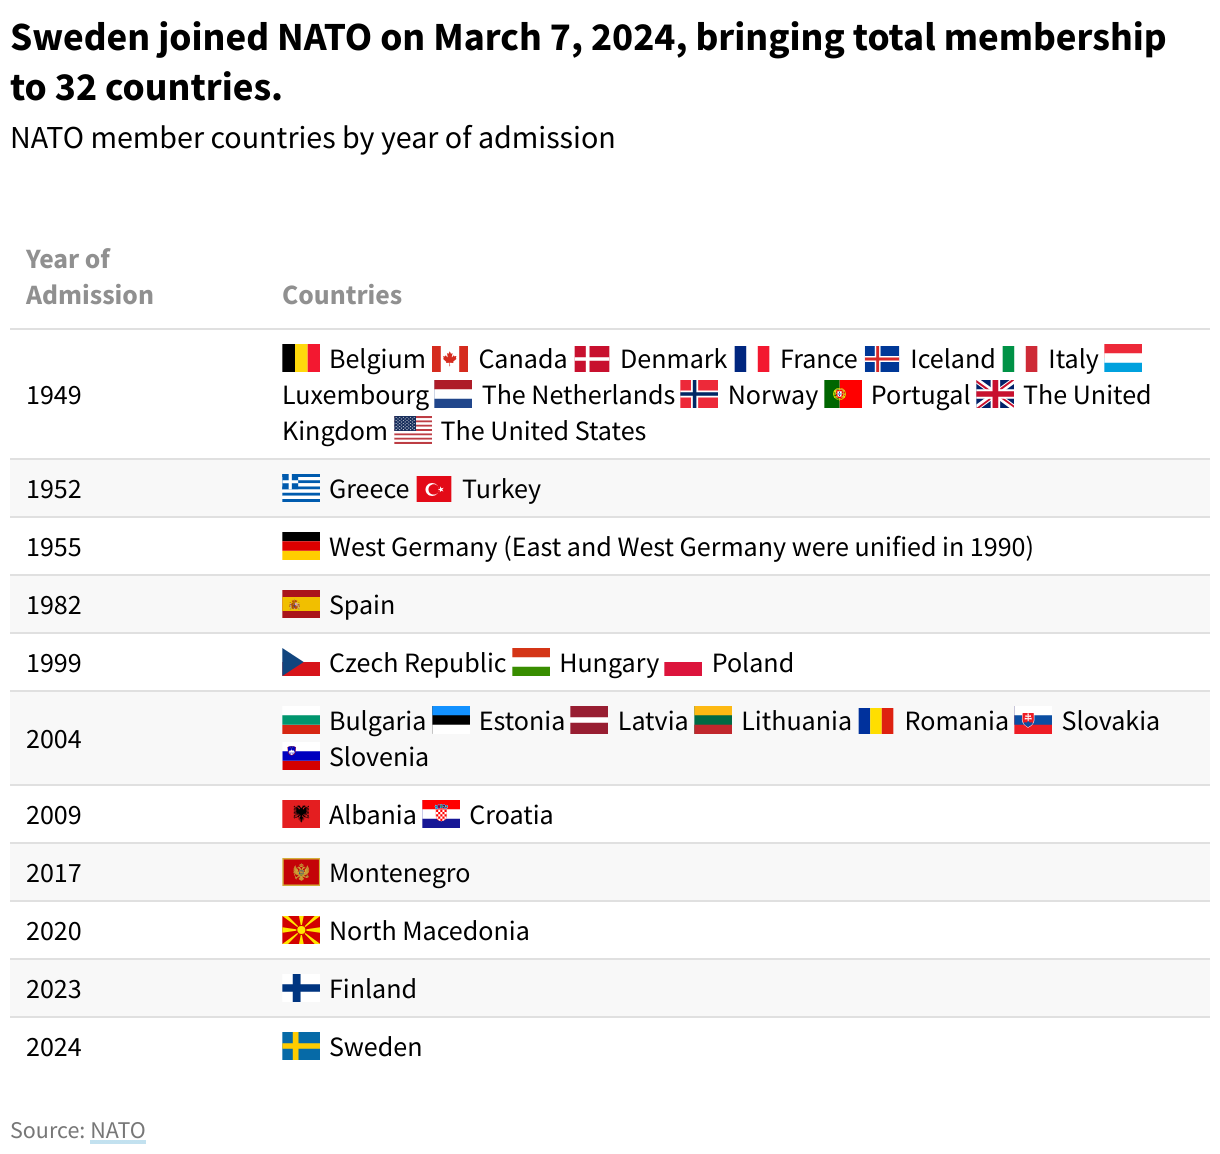 Chart showing NATO member countries by year of admission. 